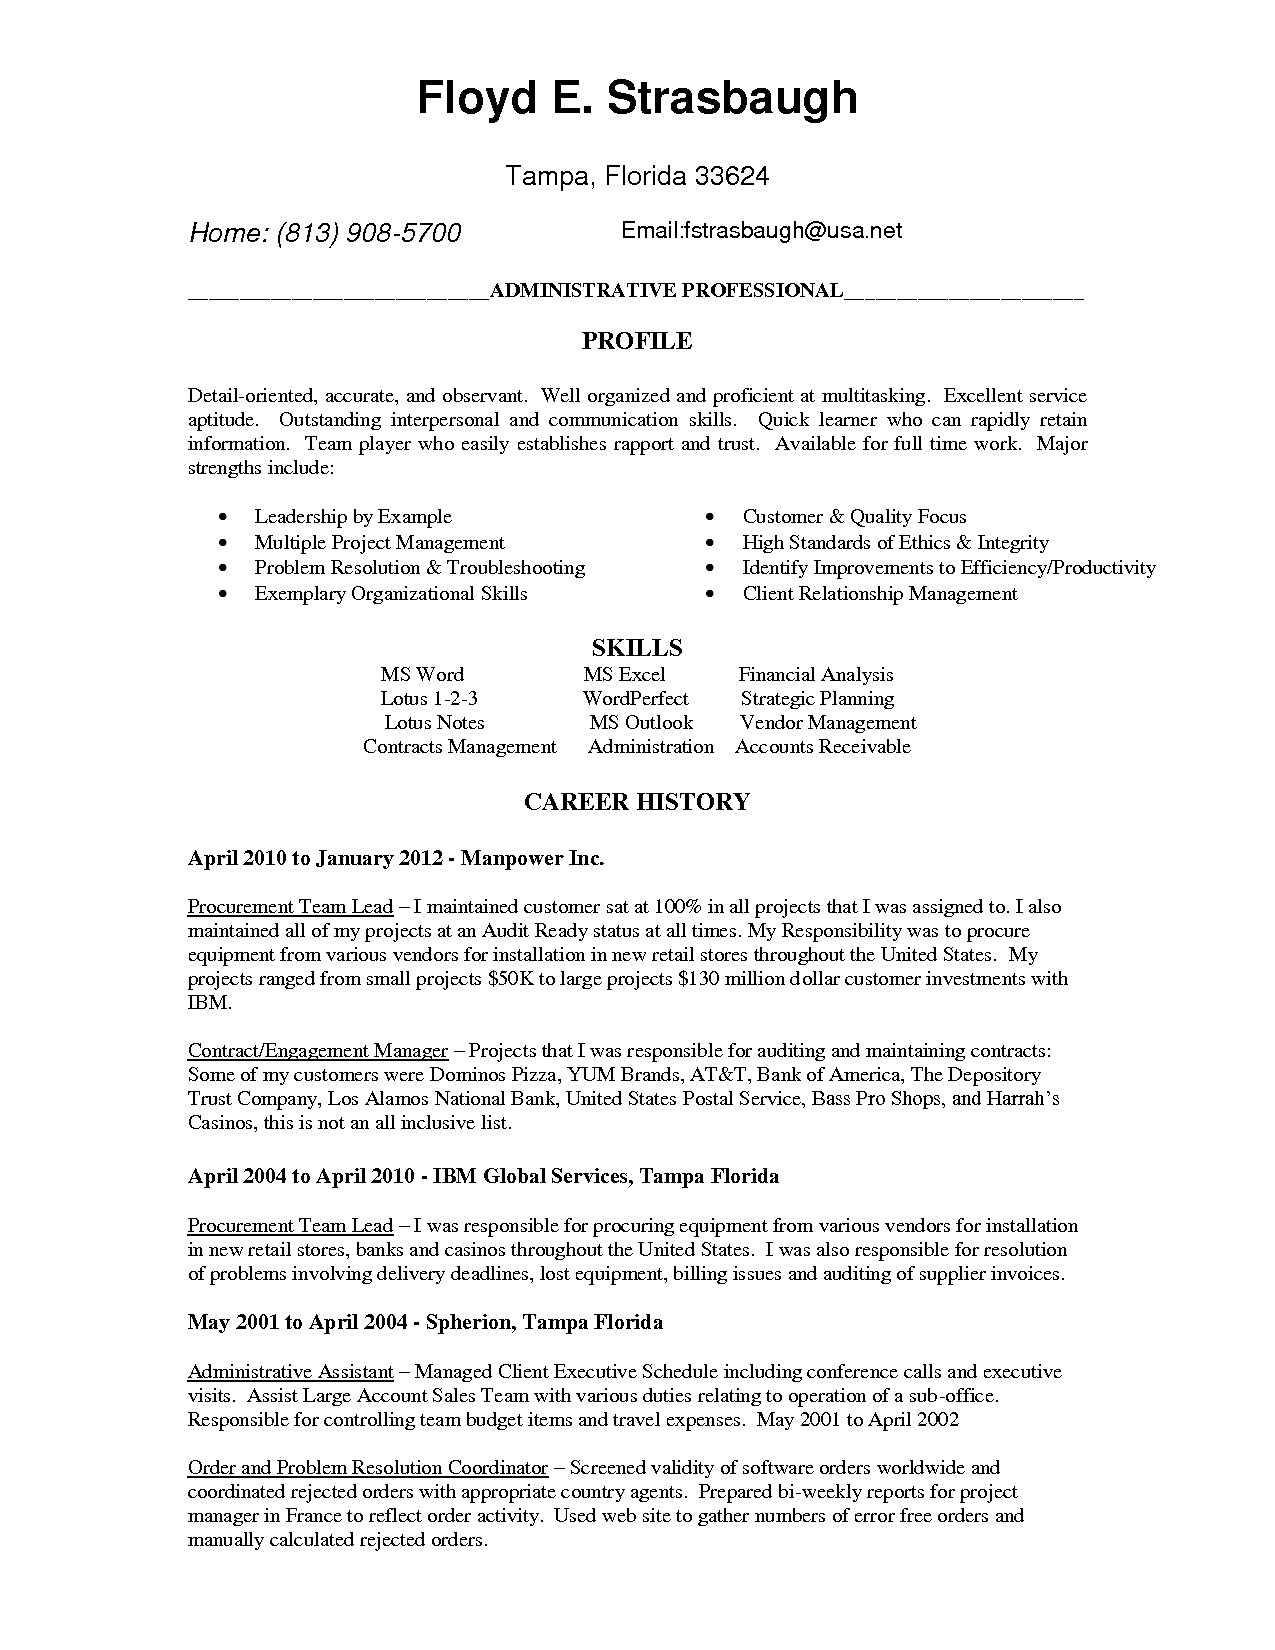 Sales Cover Letter Template Free - Sales Projection Template Free Download